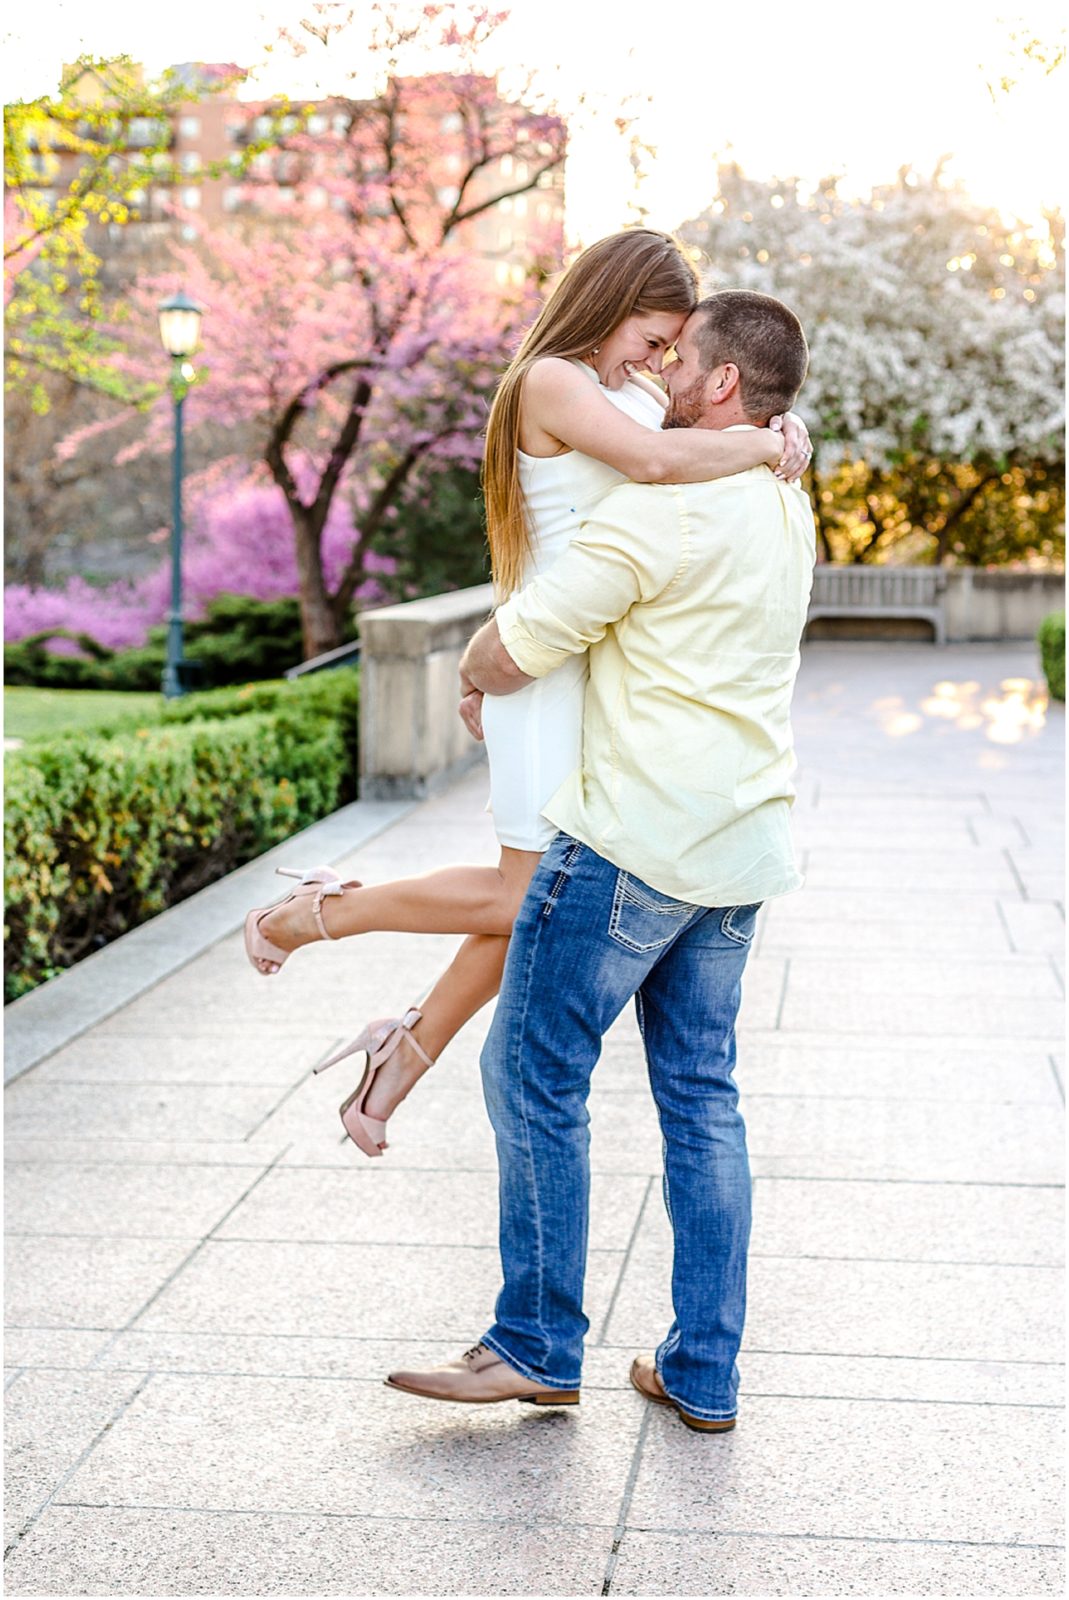 having fun at their engagement session